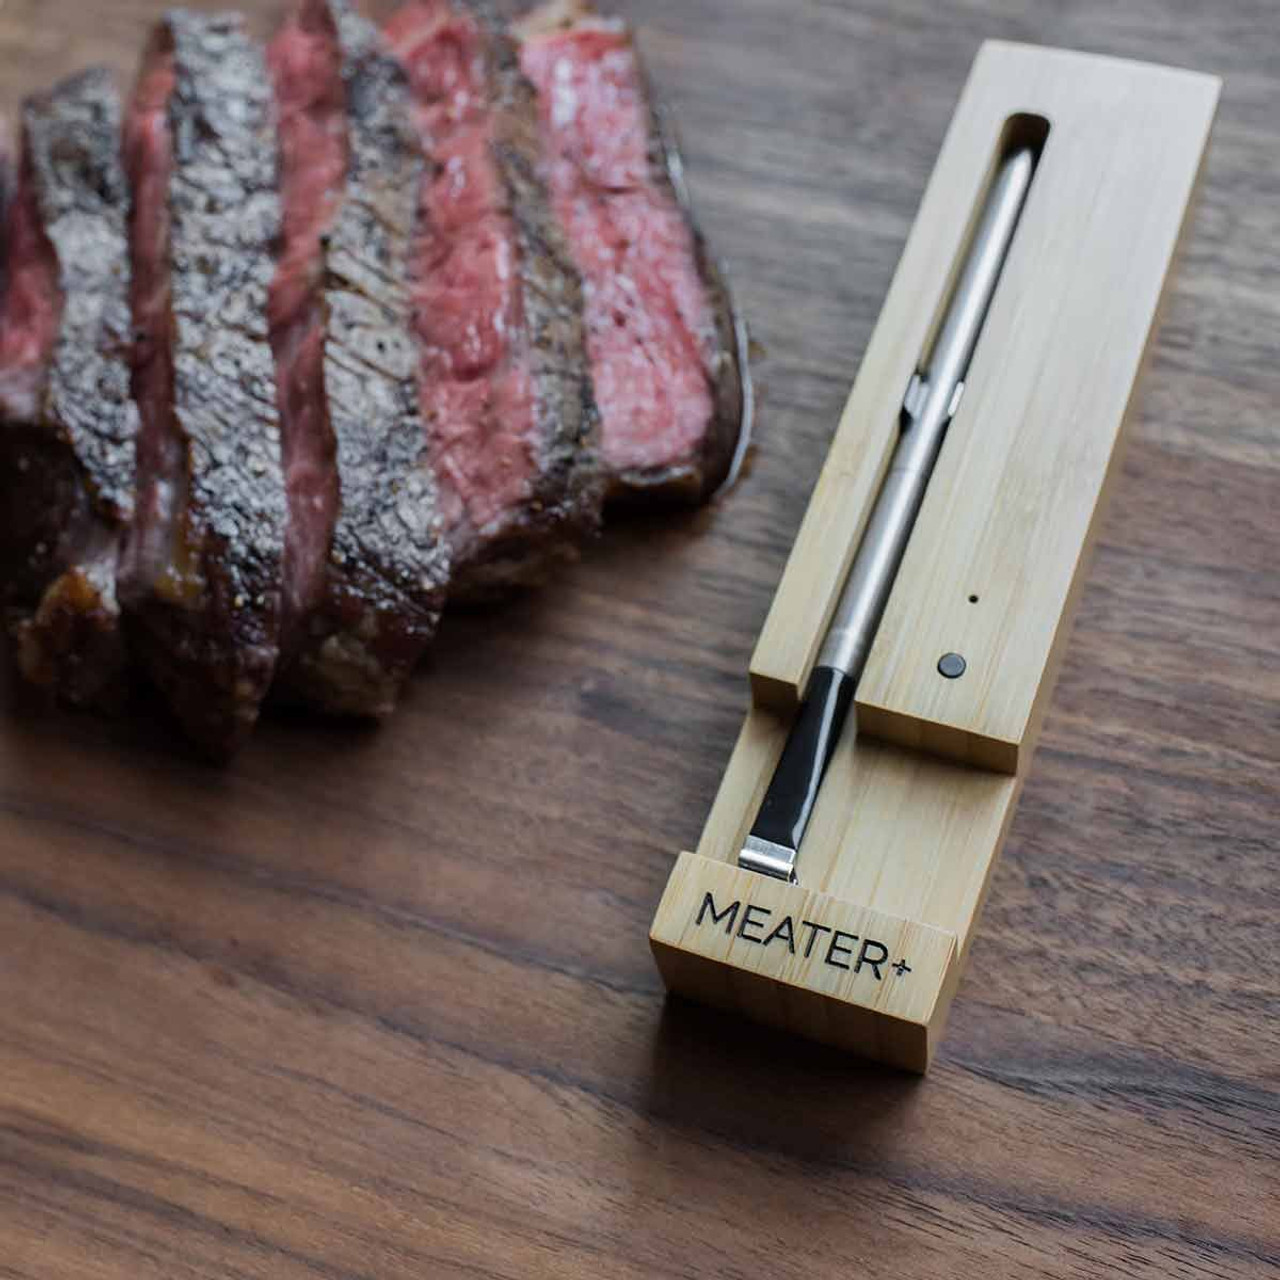 Original MEATER: Wireless Digital Smart Meat Thermometer